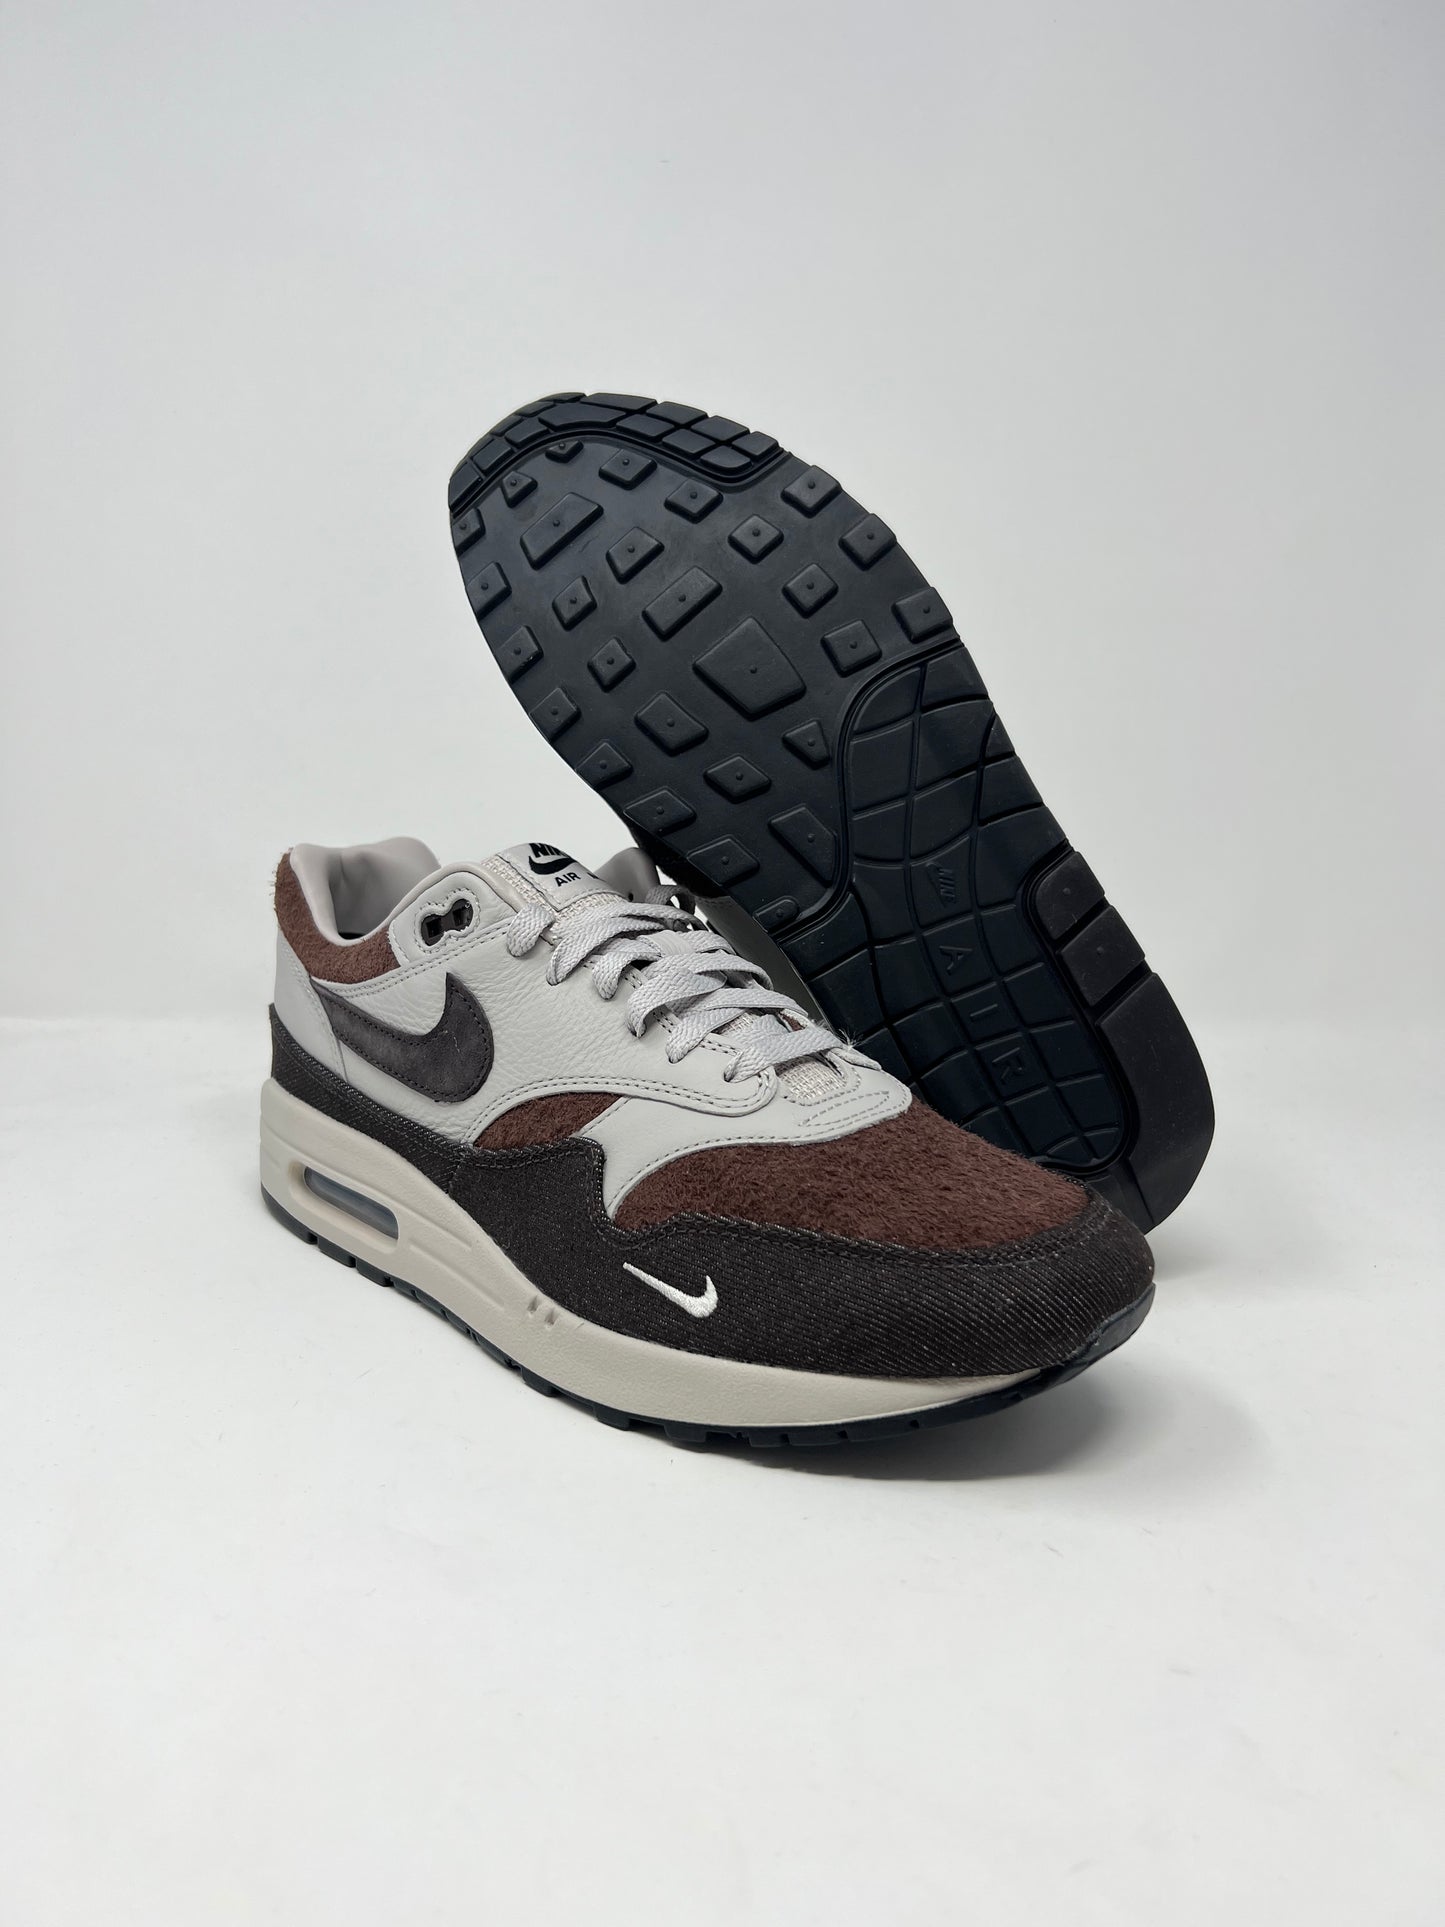 Nike Air Max 1 Size? Exclusive Considered UK9.5 DS